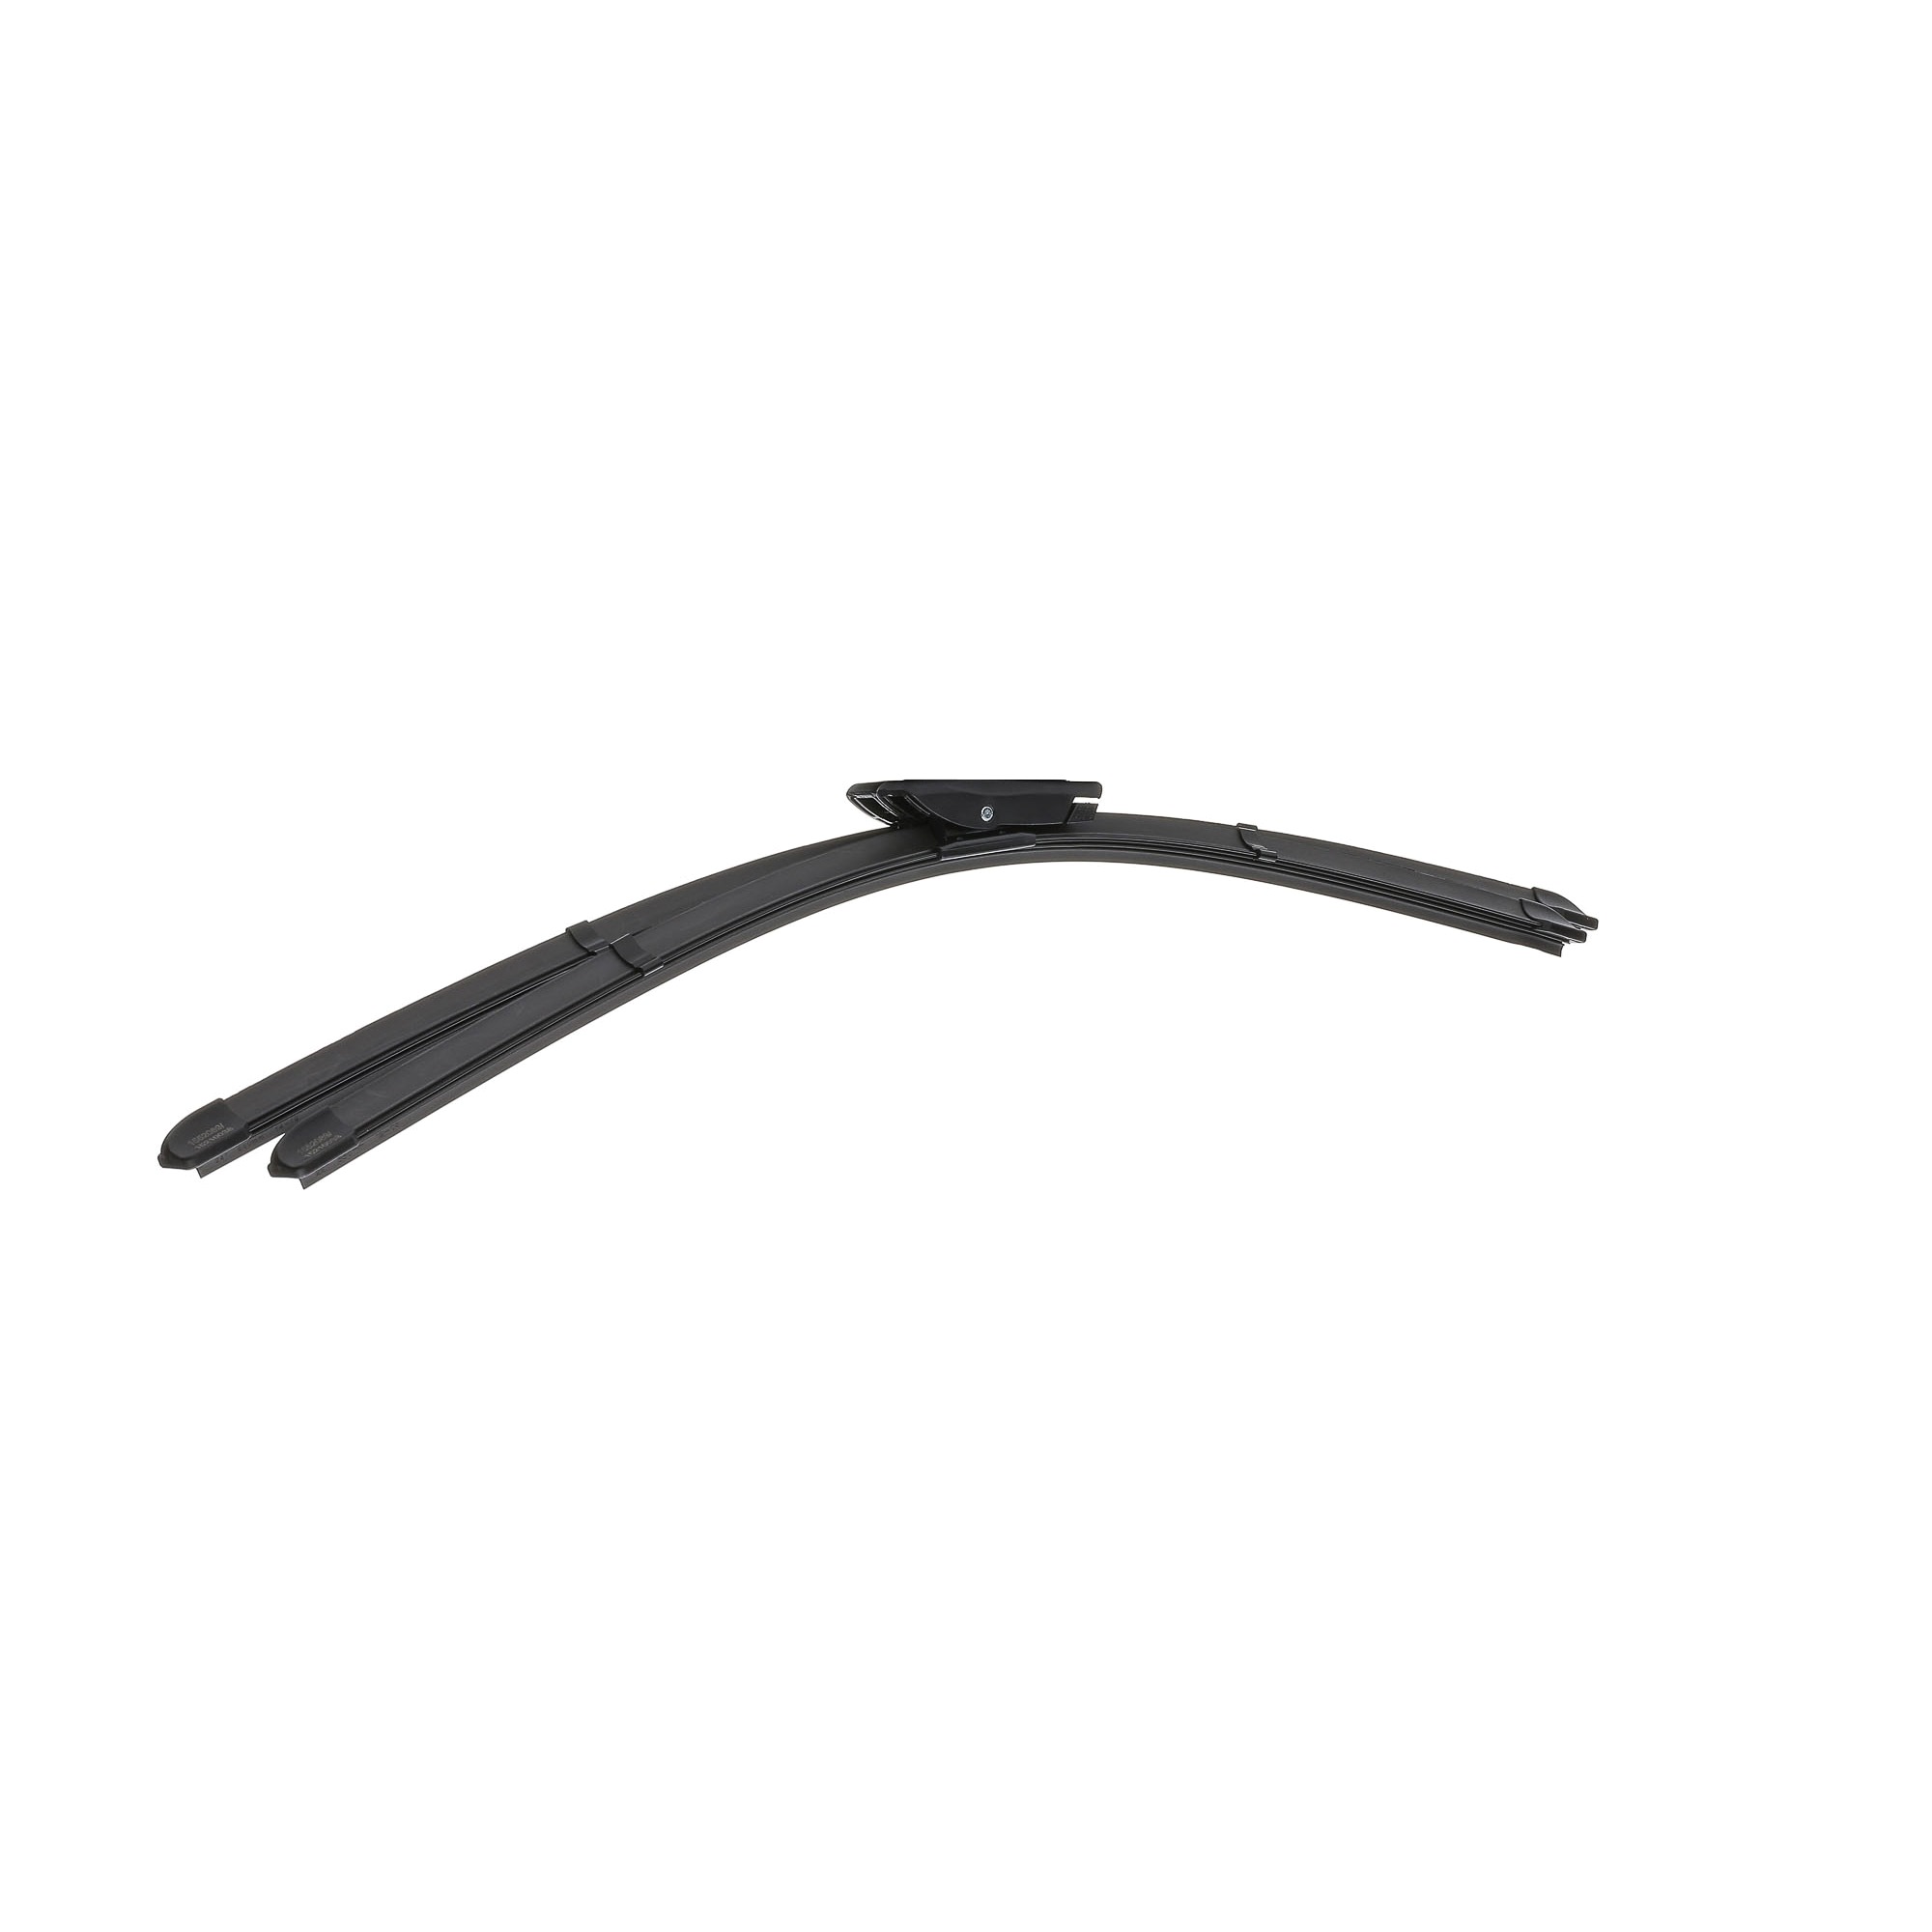 RIDEX 298W0306 Wiper blade 600, 550 mm, Beam, for left-hand drive vehicles